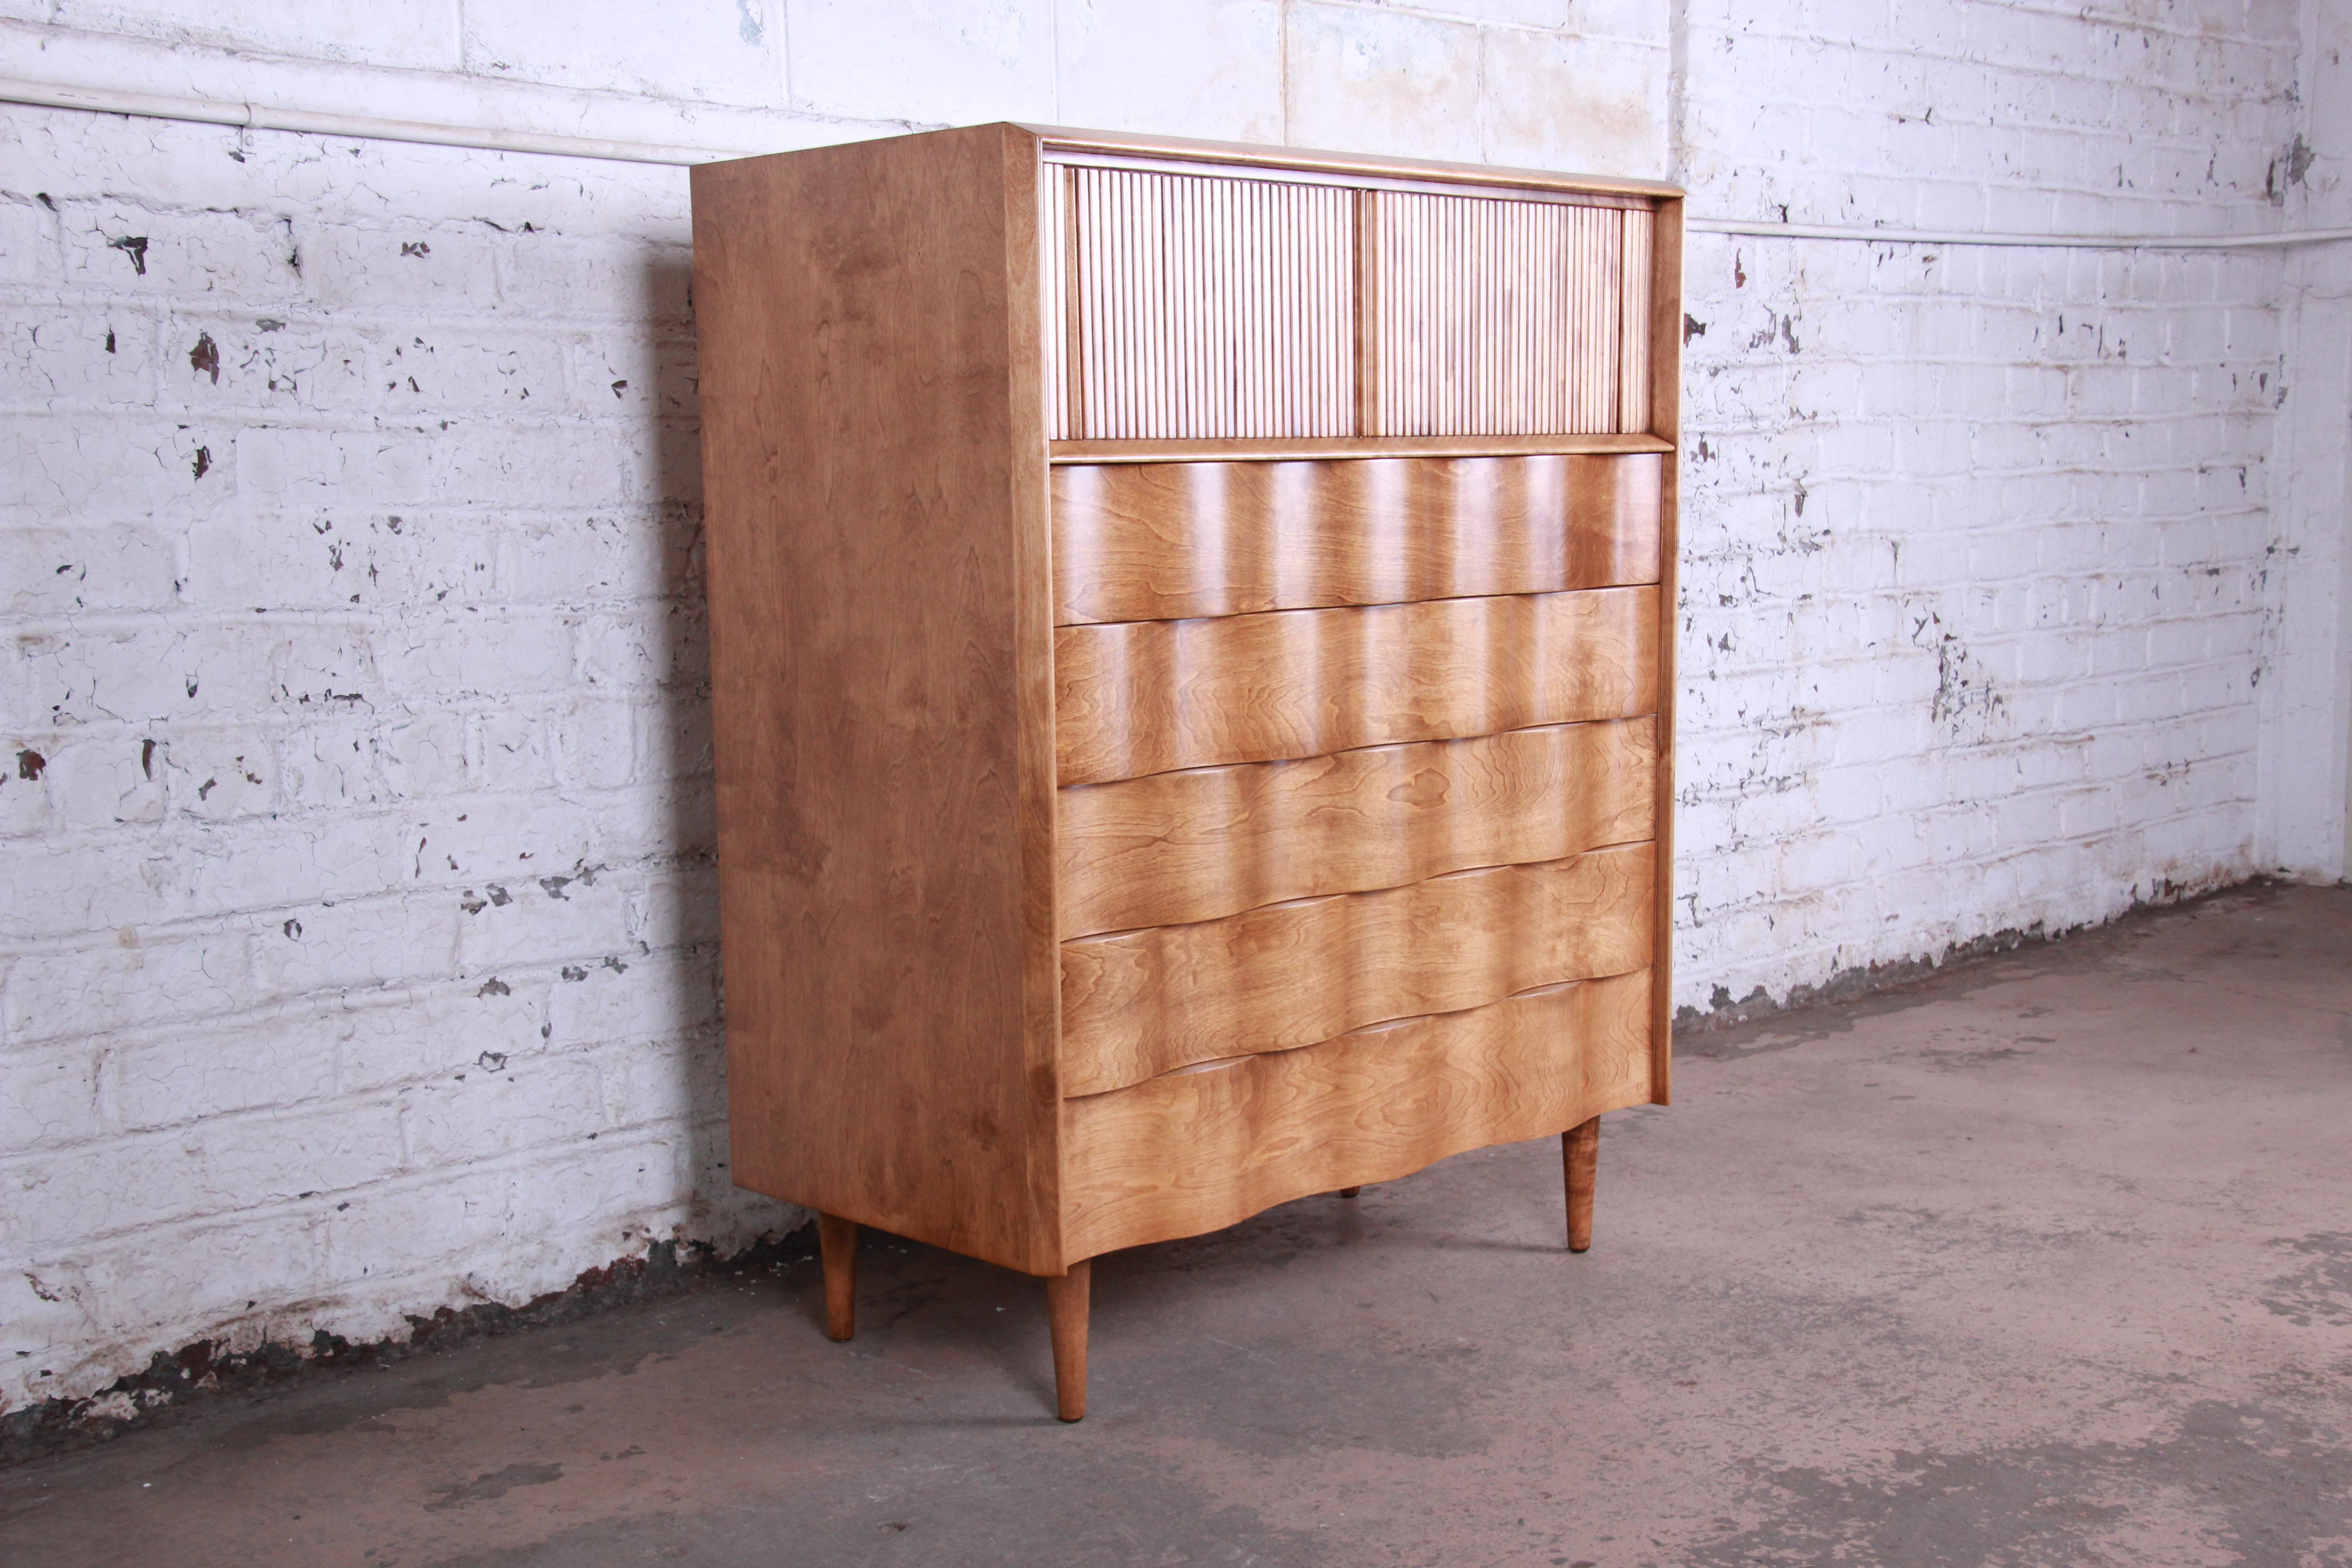 Offering a rare and exceptional Mid-Century Modern wave front highboy dresser designed by Edmond Spence. The dresser features a unique wave Front Design and stunning birch wood grain. It offers ample storage good storage deep dovetailed drawers.